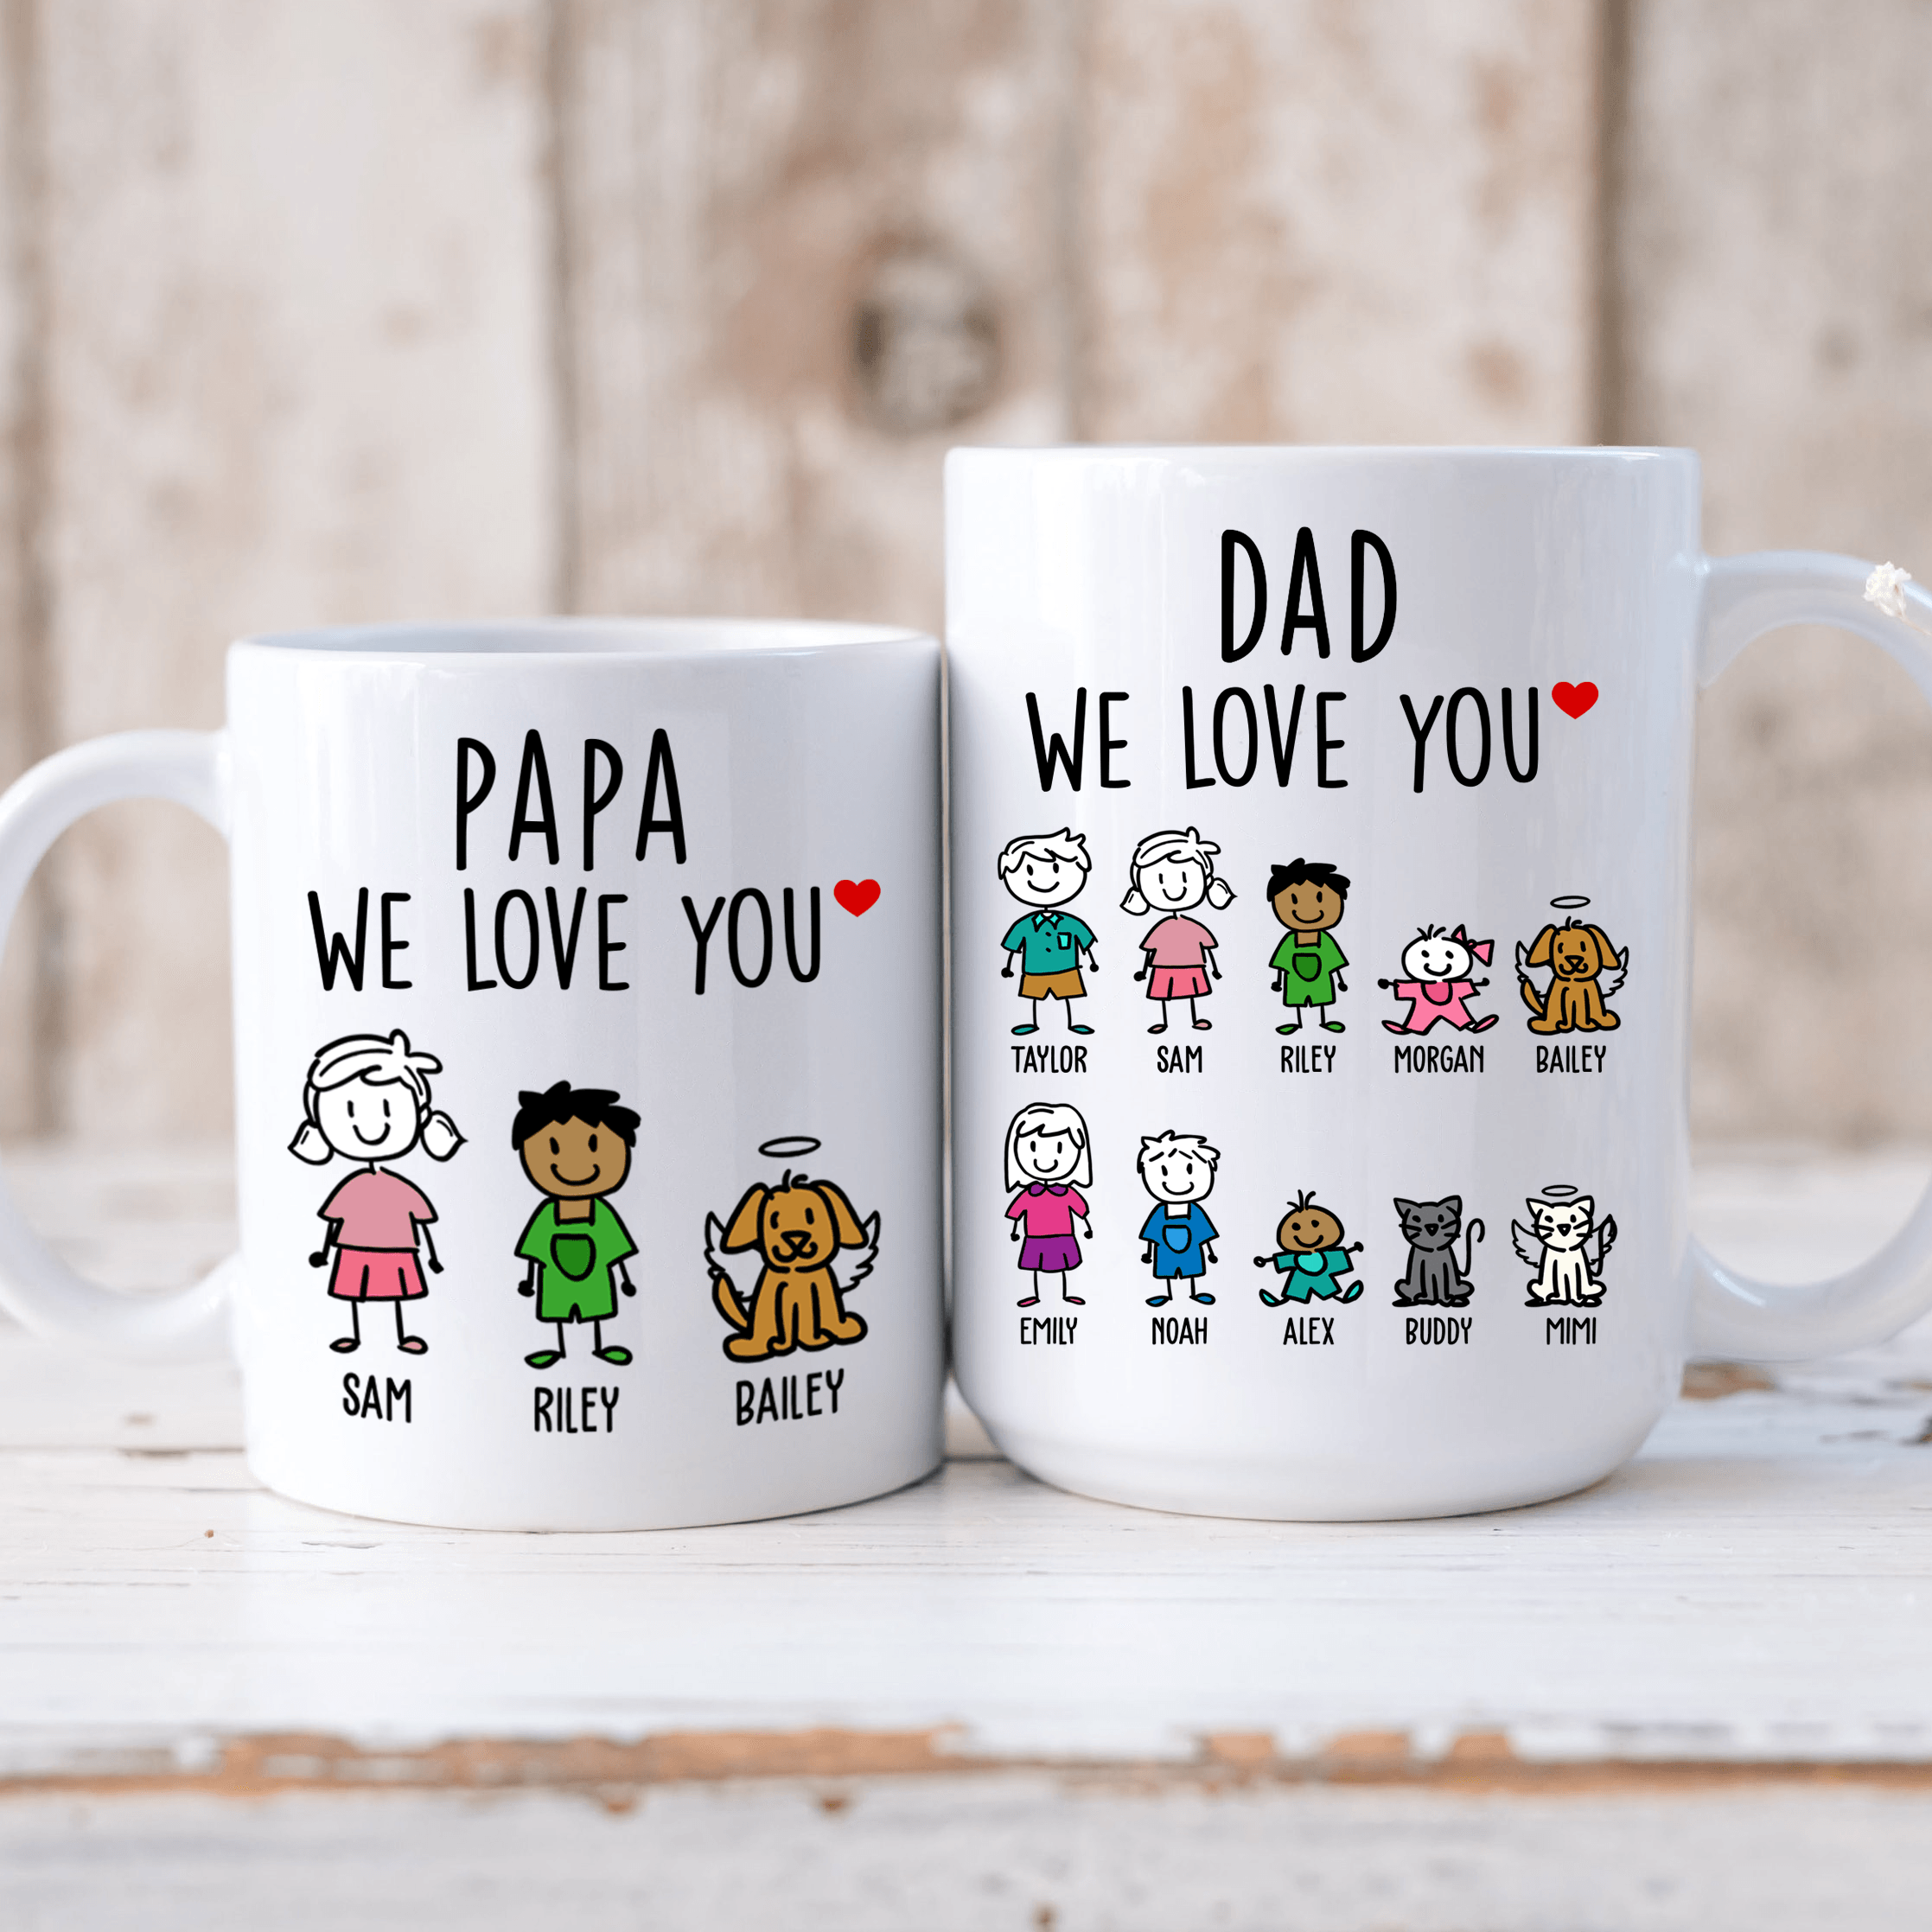 Dad, We Love You - Personalized Custom Coffee Mug - Funny Father's Day Gift, Birthday Gift For Best Dad Ever, Grandpa, Daddy, Dada From Daughter, Son, Kids, Wife - Suzitee Store